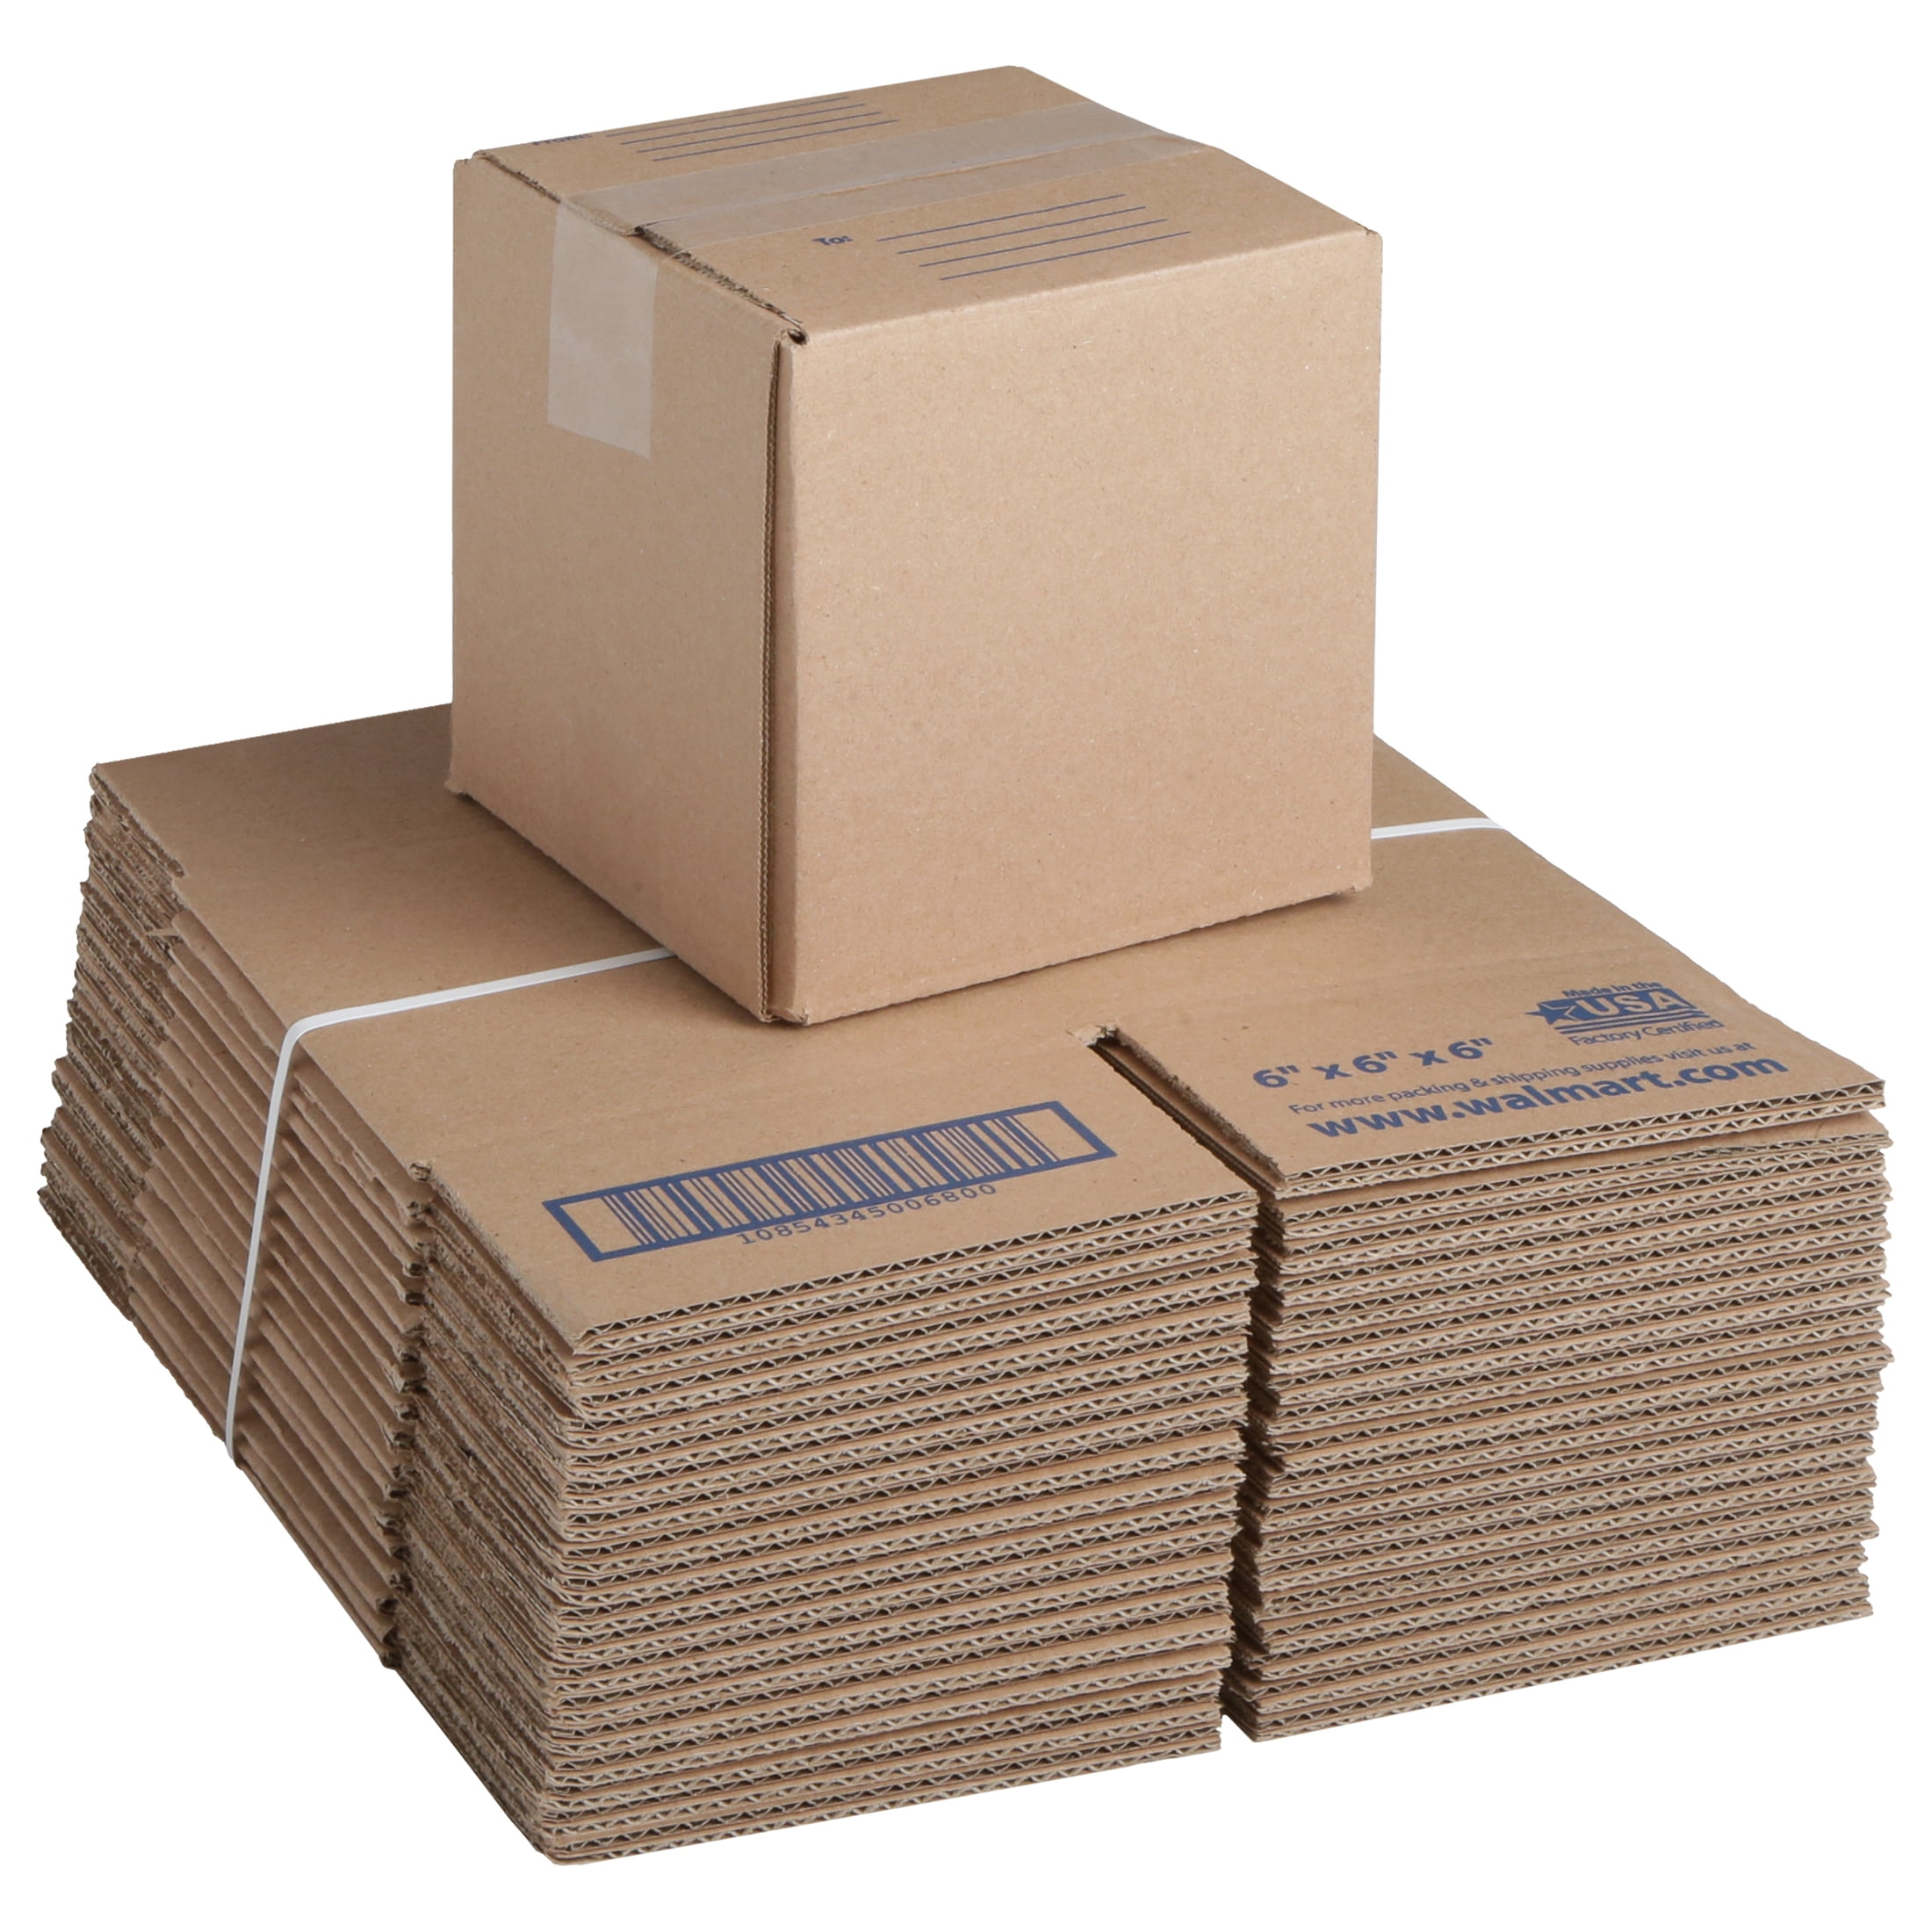 Ship Boxes - LugLess Is The Easiest, Cheapest Way to Ship Boxes!